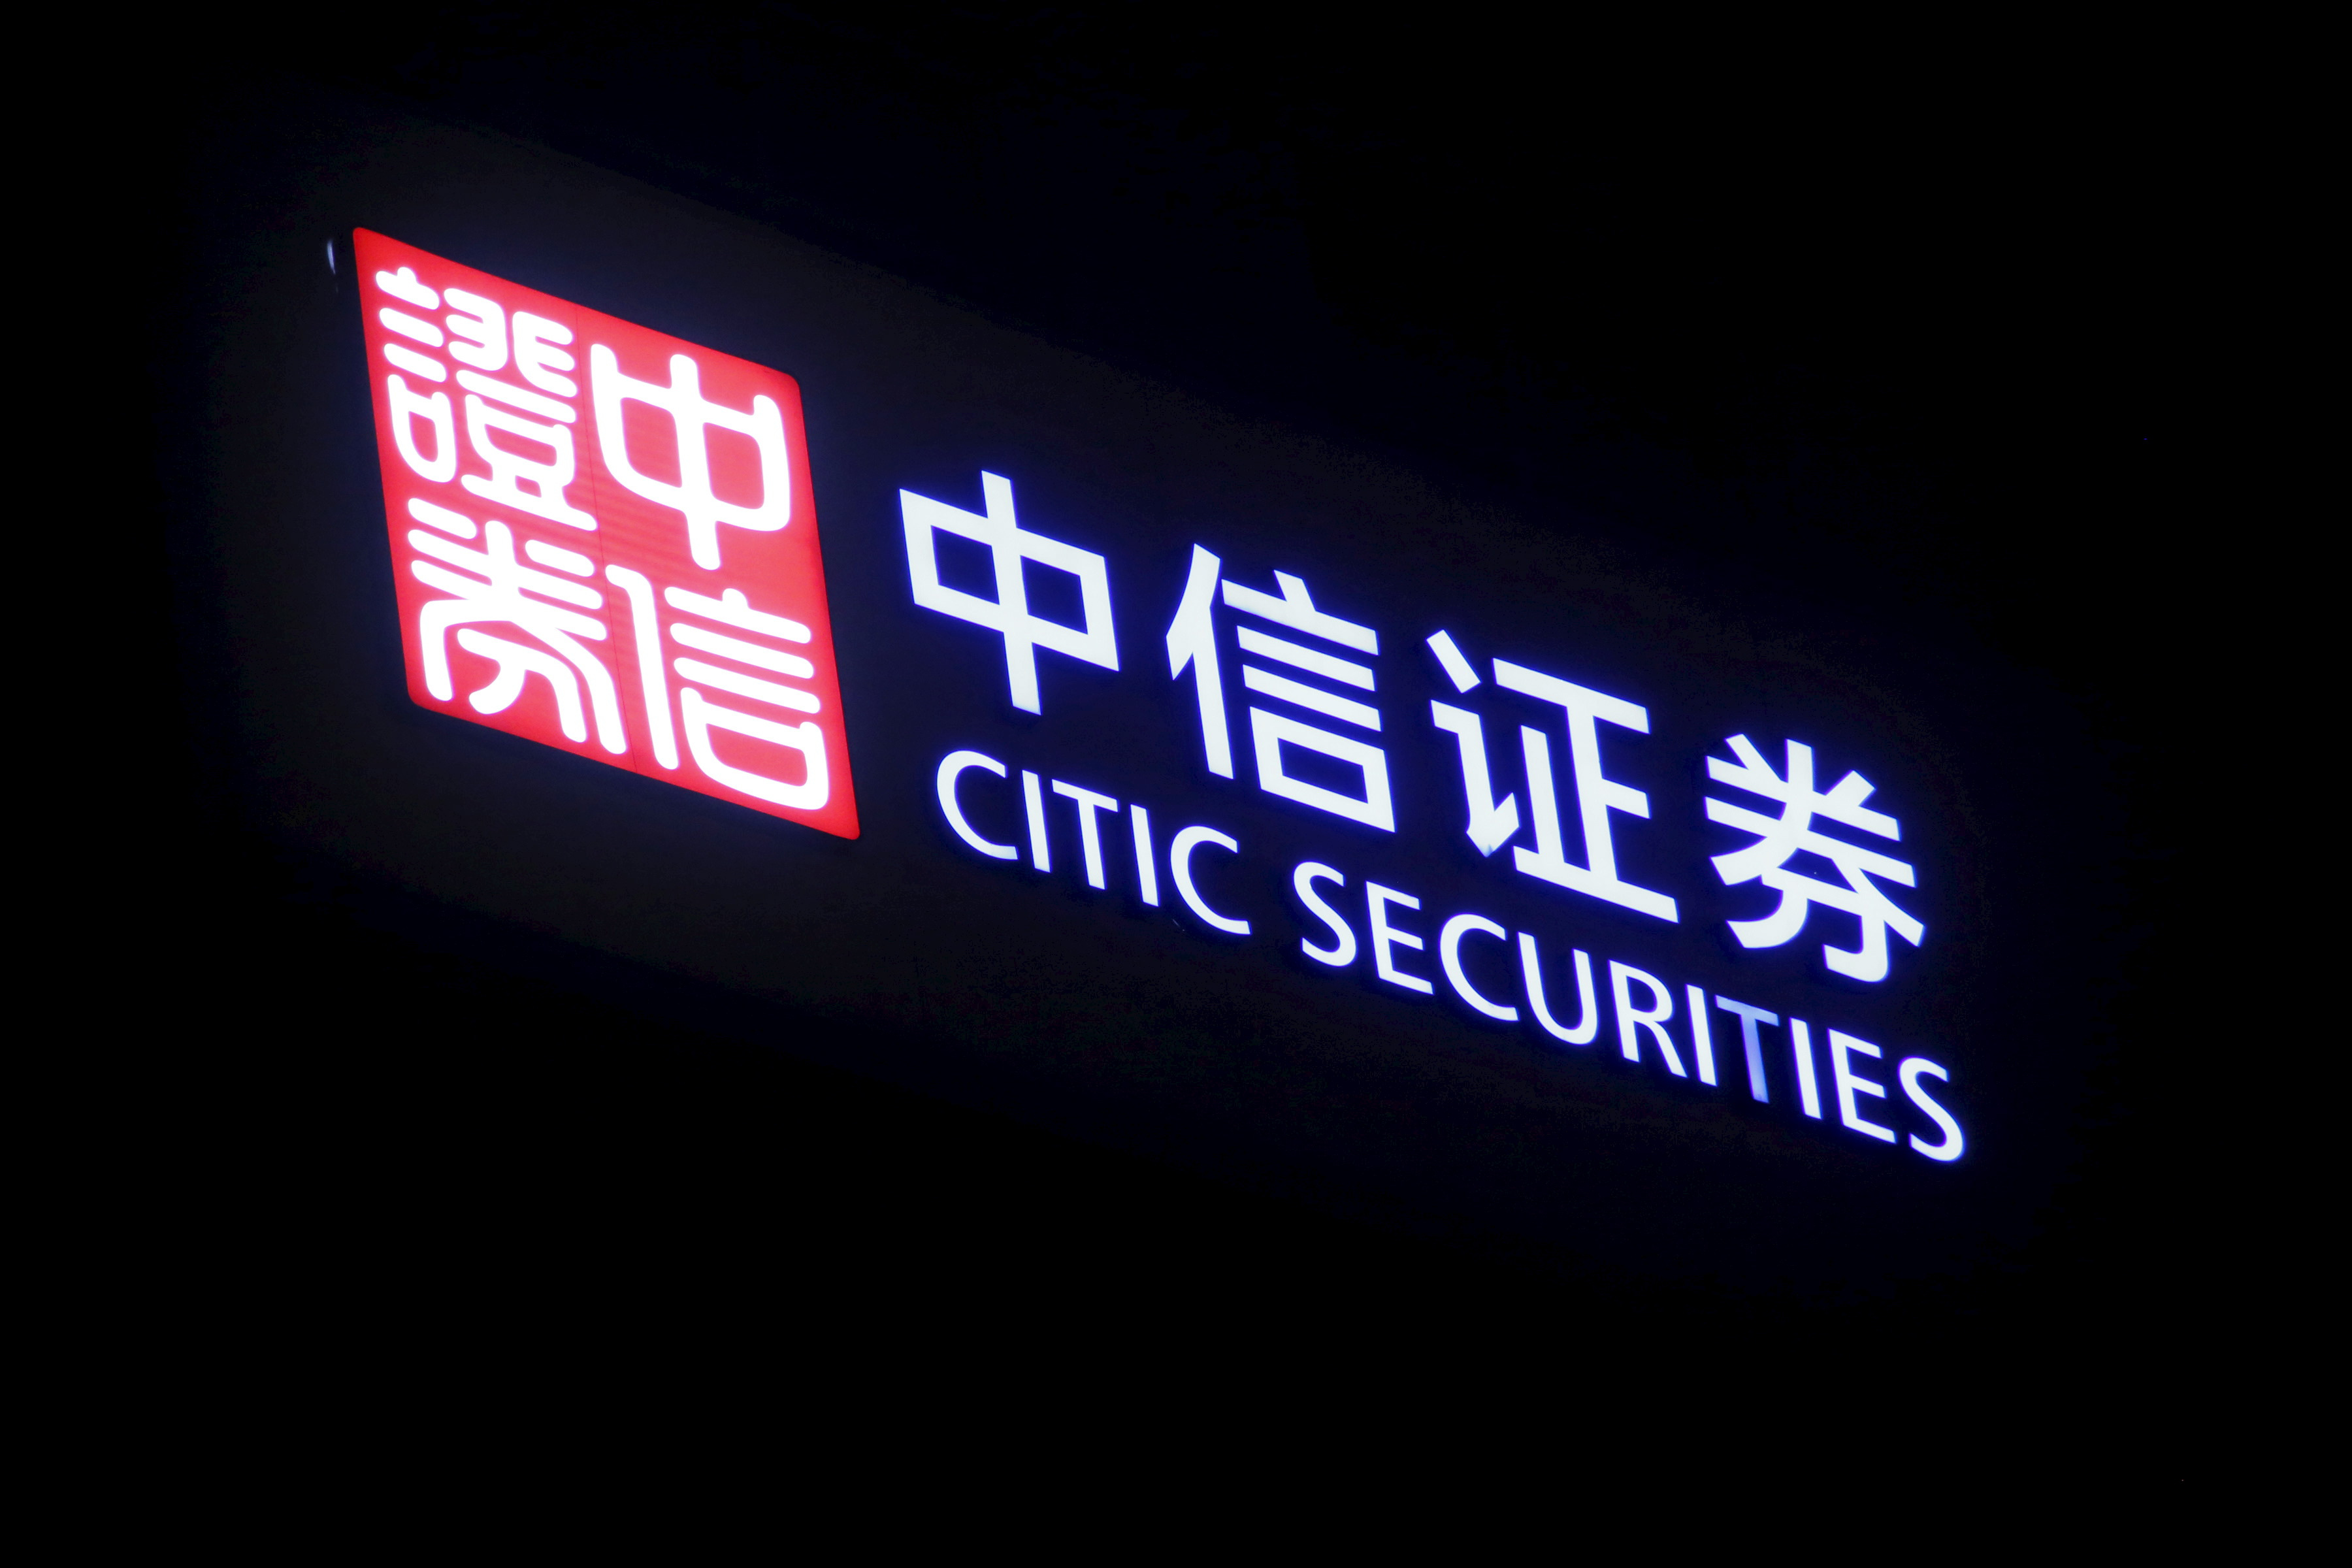 The logo of CITIC Securities is seen at its branch in Beijing